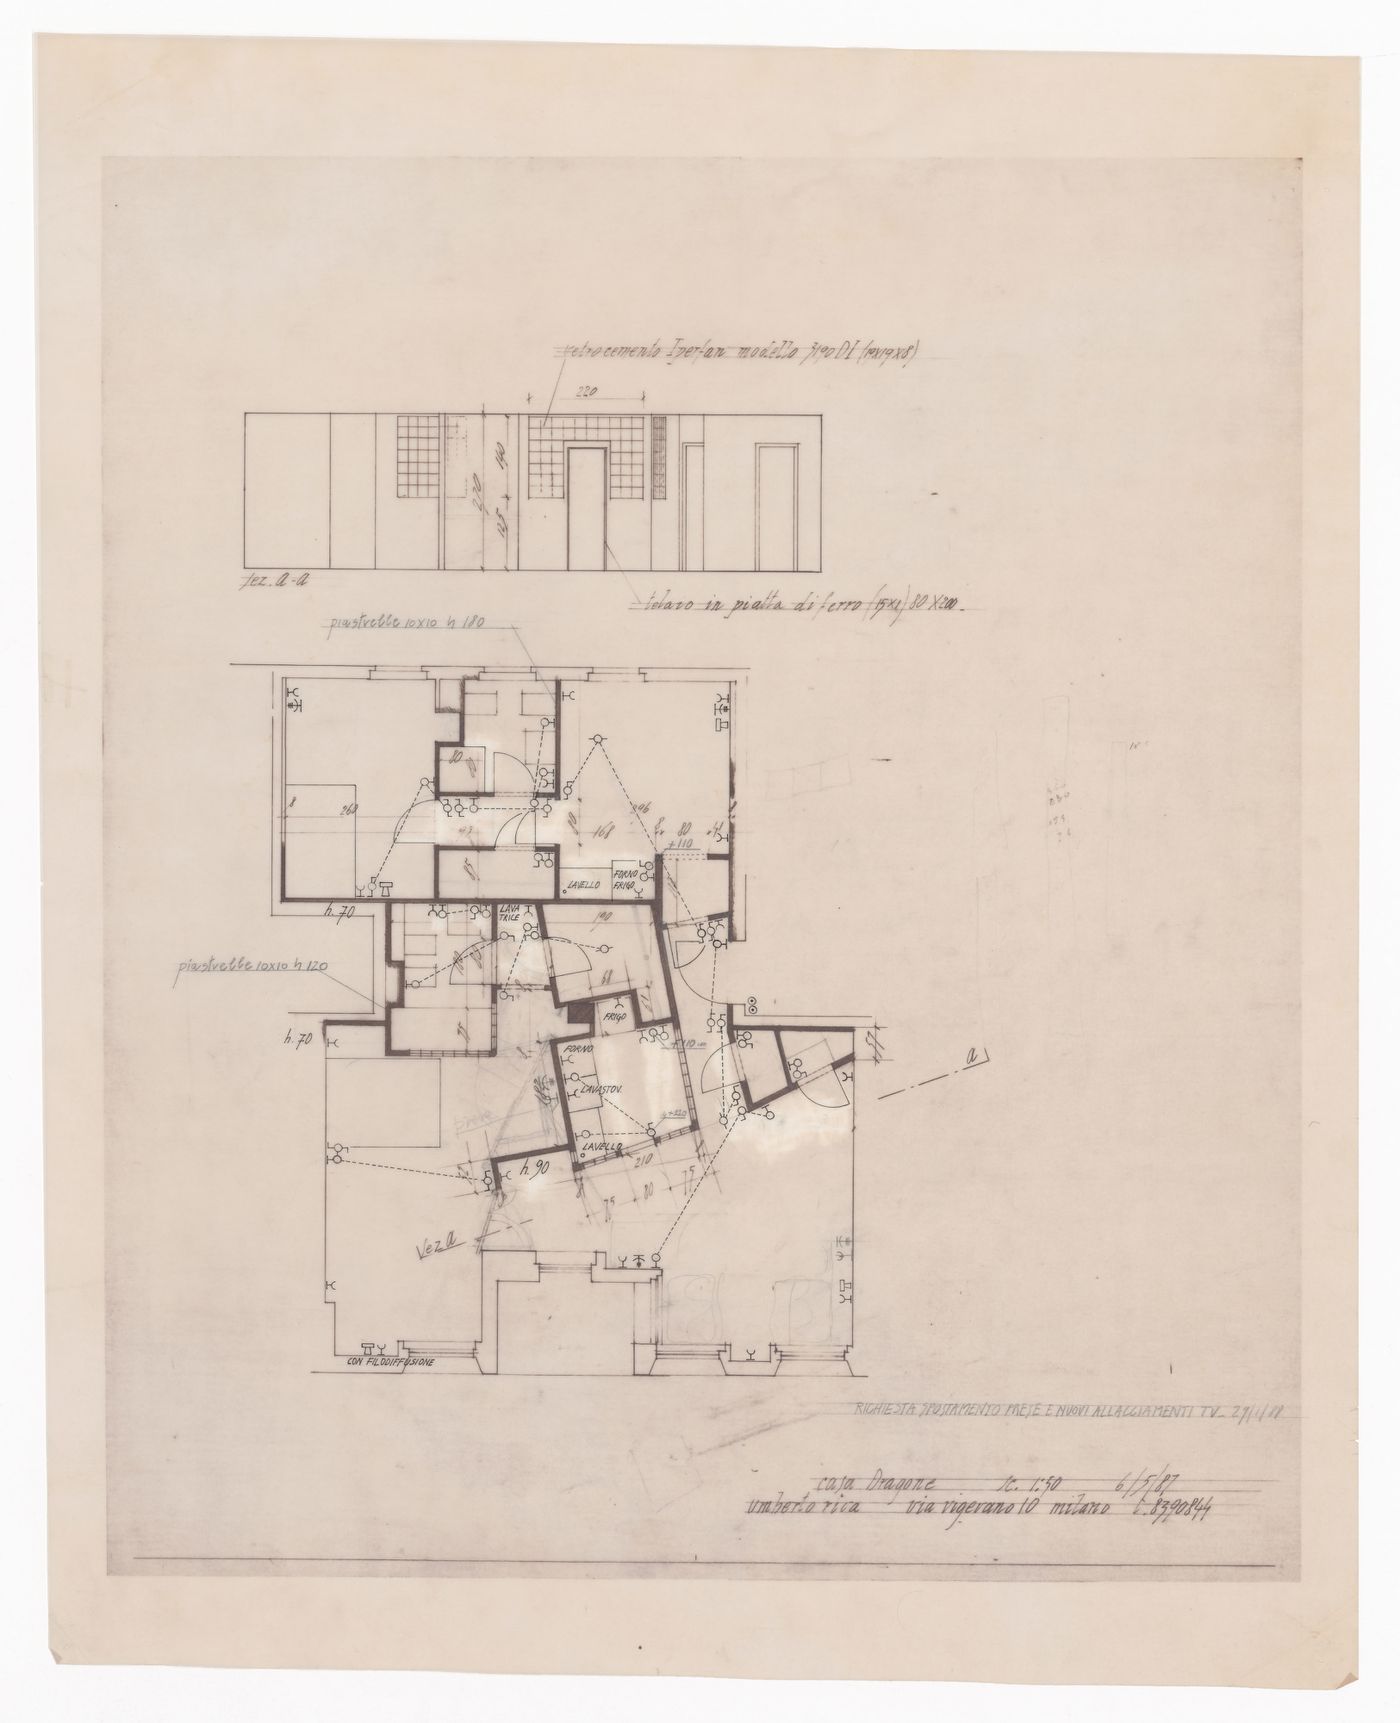 Elevation and floor plan for Casa Dragone e Paggi, Milan, Italy